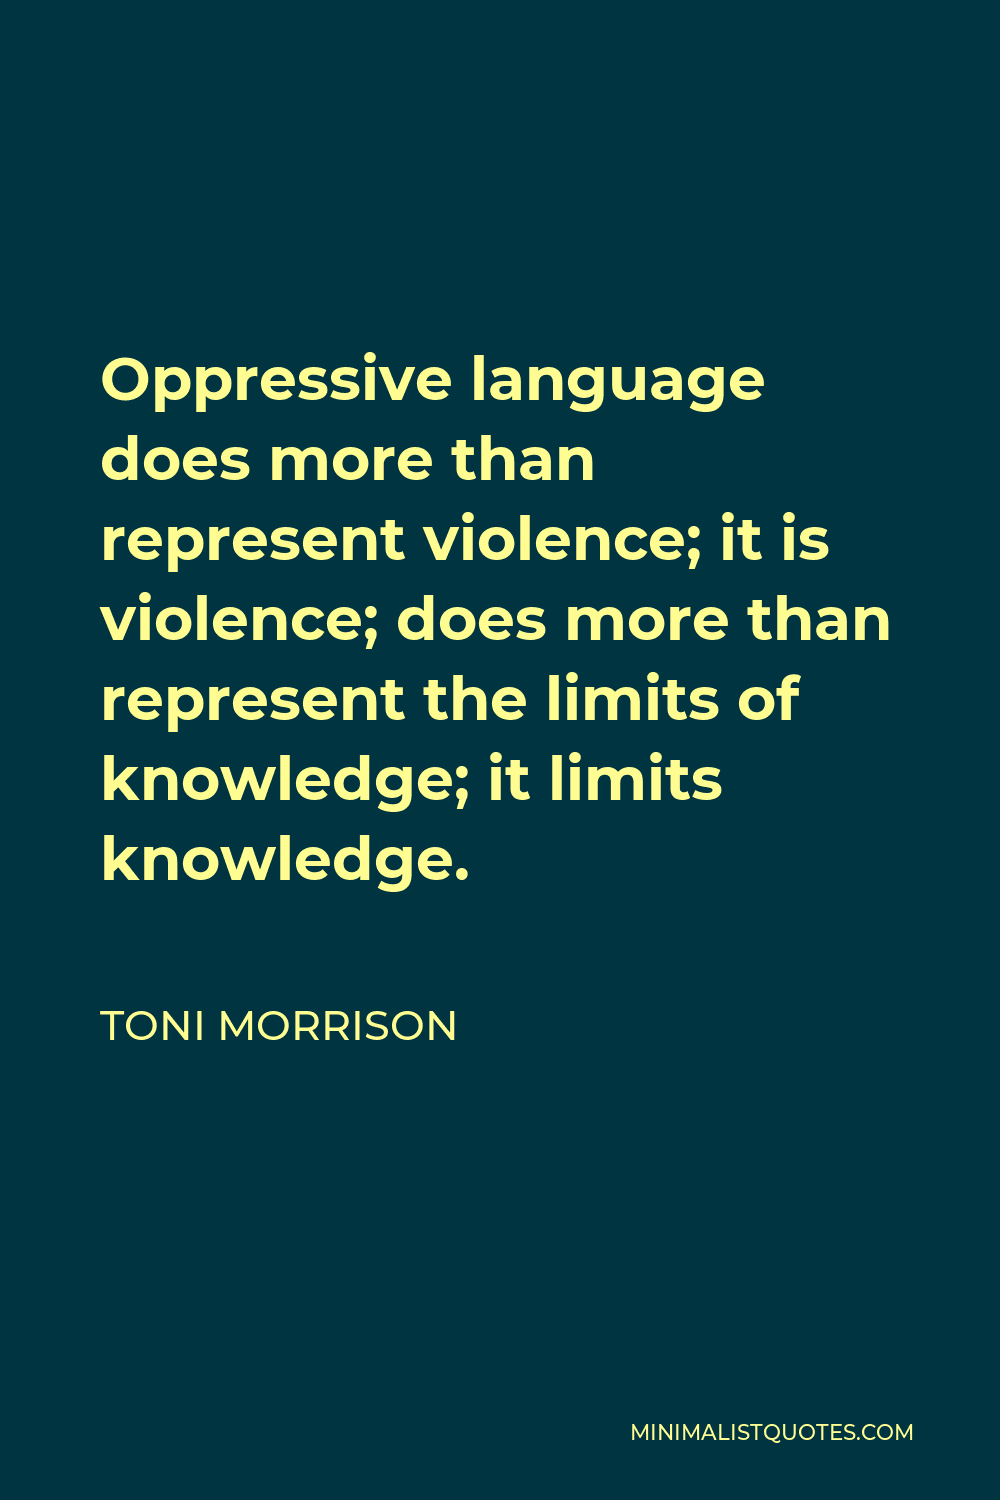 Toni Morrison Quote - Oppressive language does more than represent violence; it is violence; does more than represent the limits of knowledge; it limits knowledge.